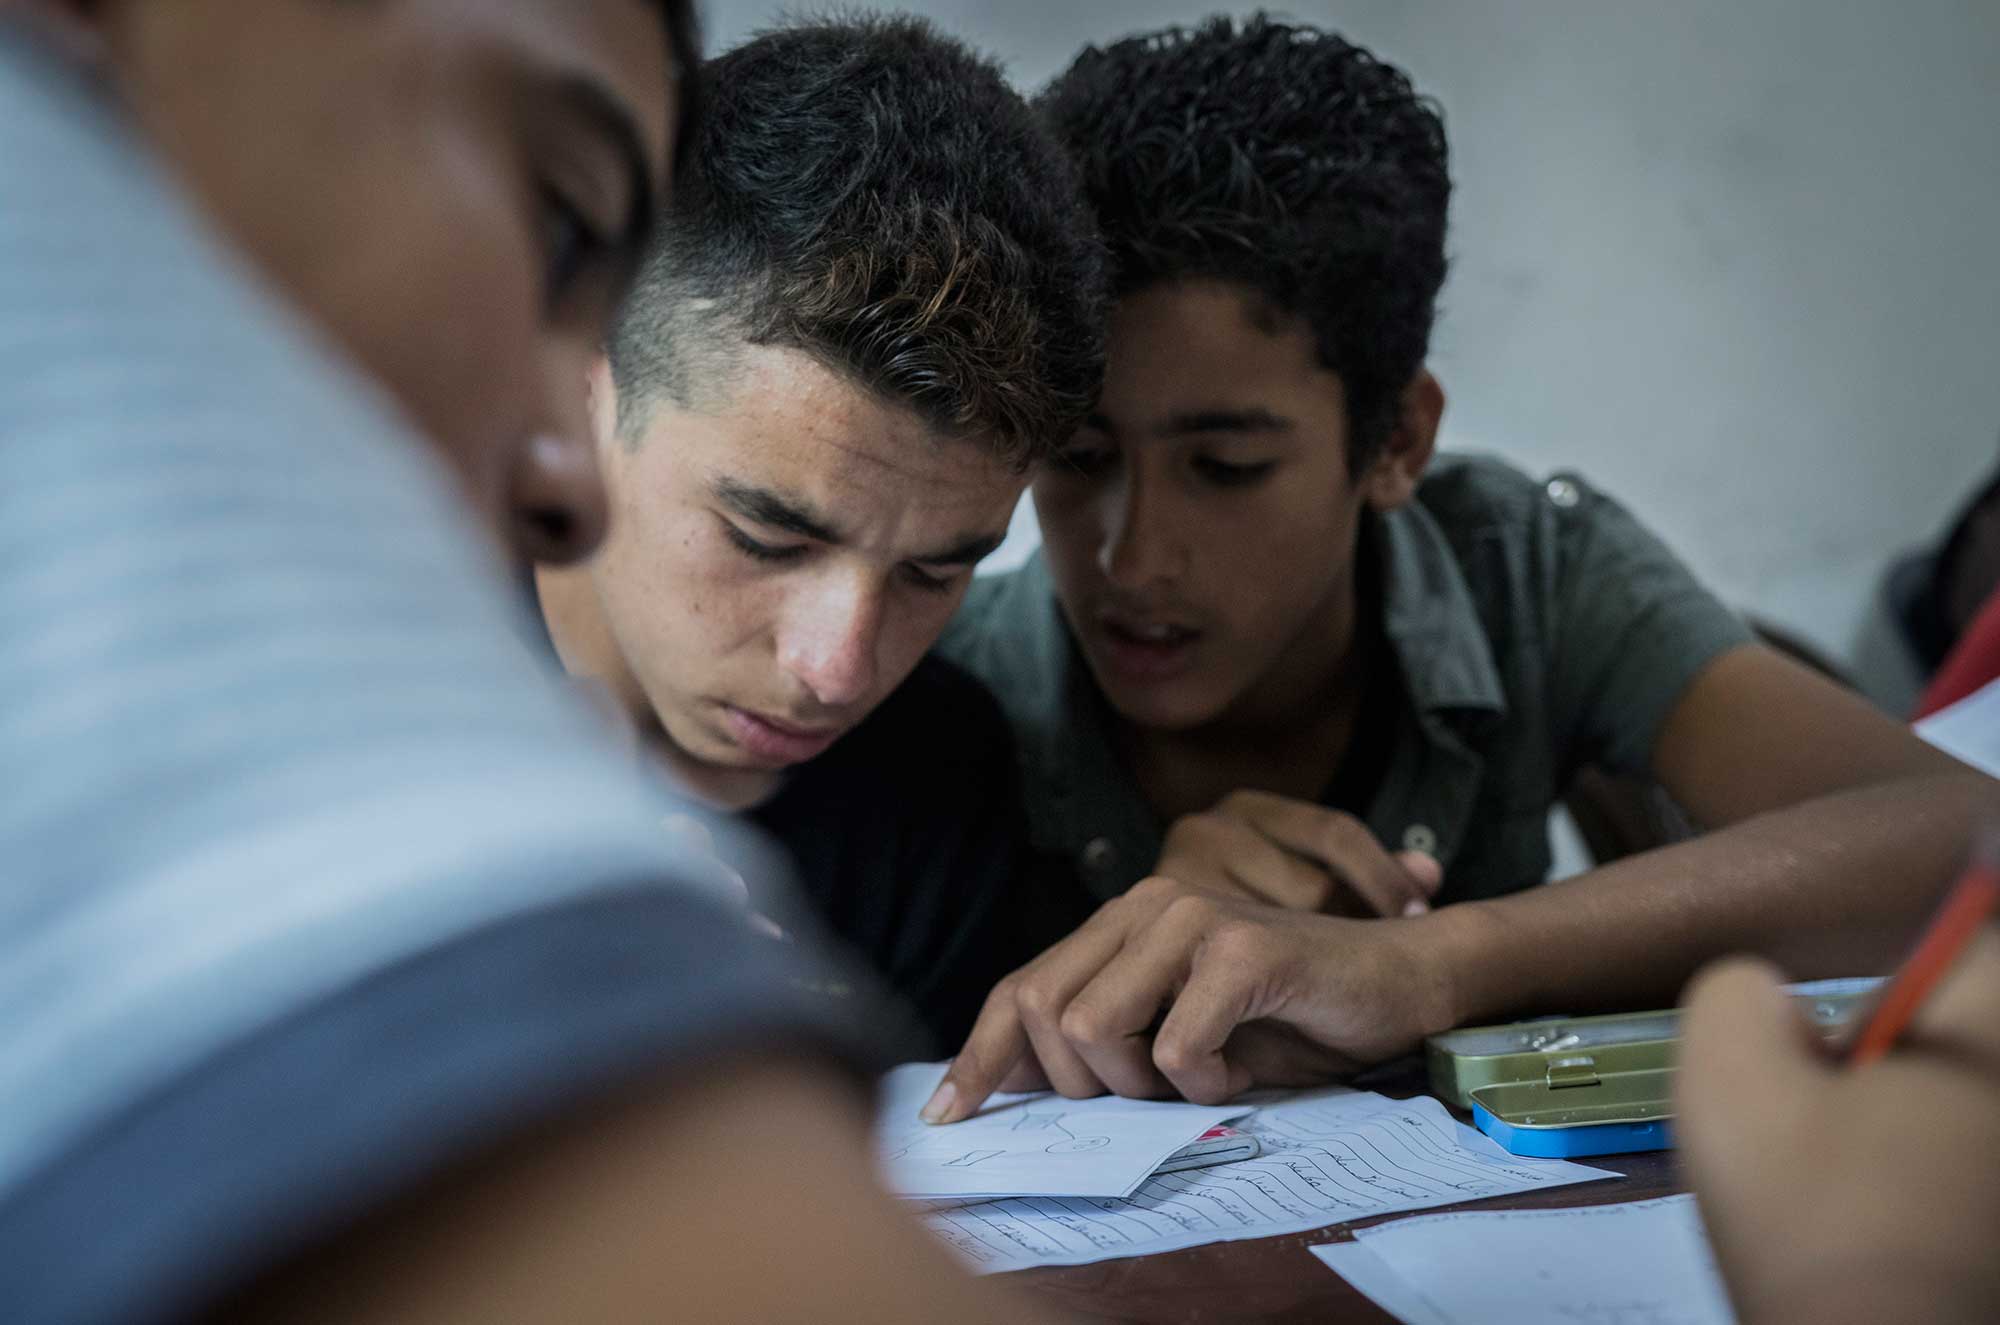 14-year-old Abed, a Syrian refugee, helps Hassan, who has been out of school for four years, with his classwork.